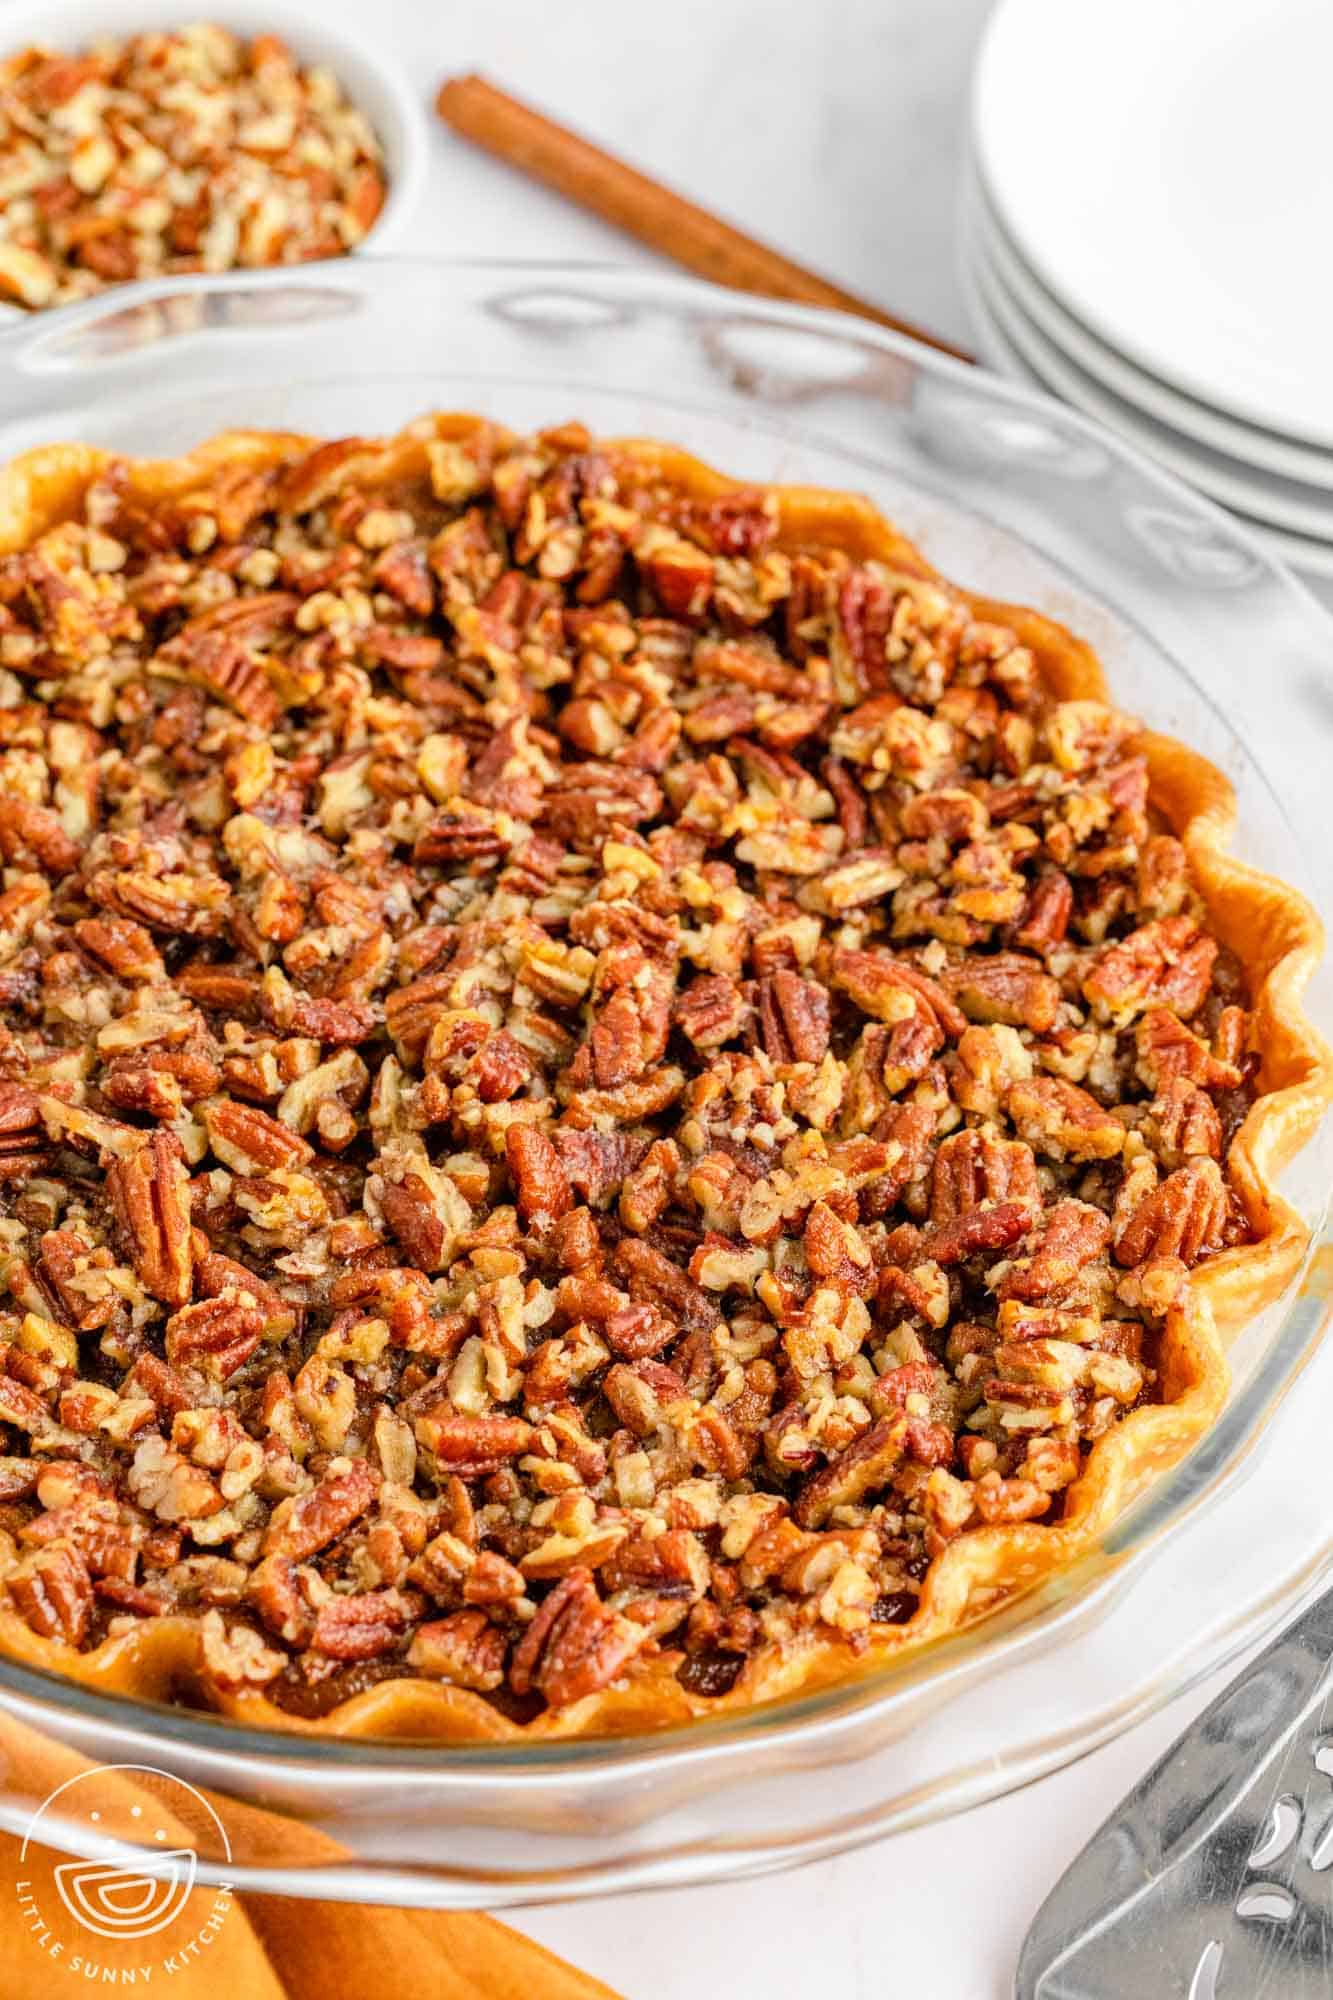 A whole pie in a glass pie dish, topped with pecans.